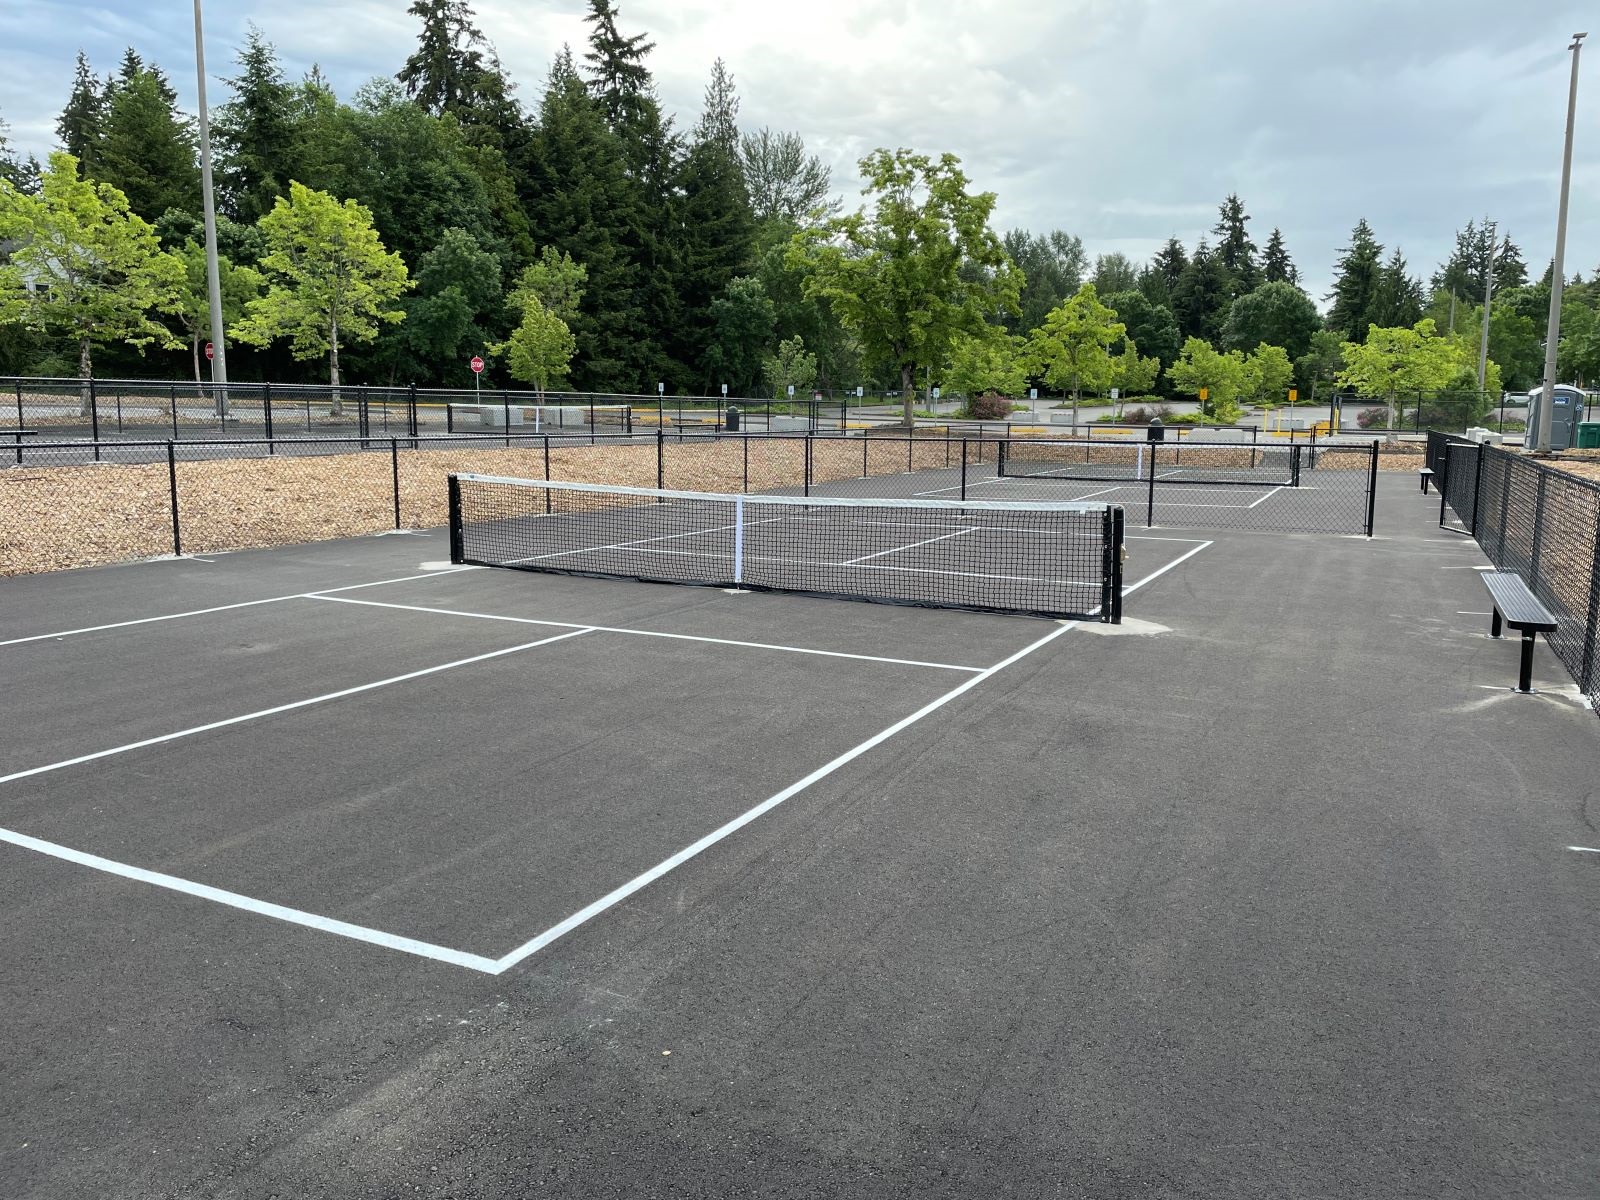 Temporary pickleball courts at the Houghton Park and Play